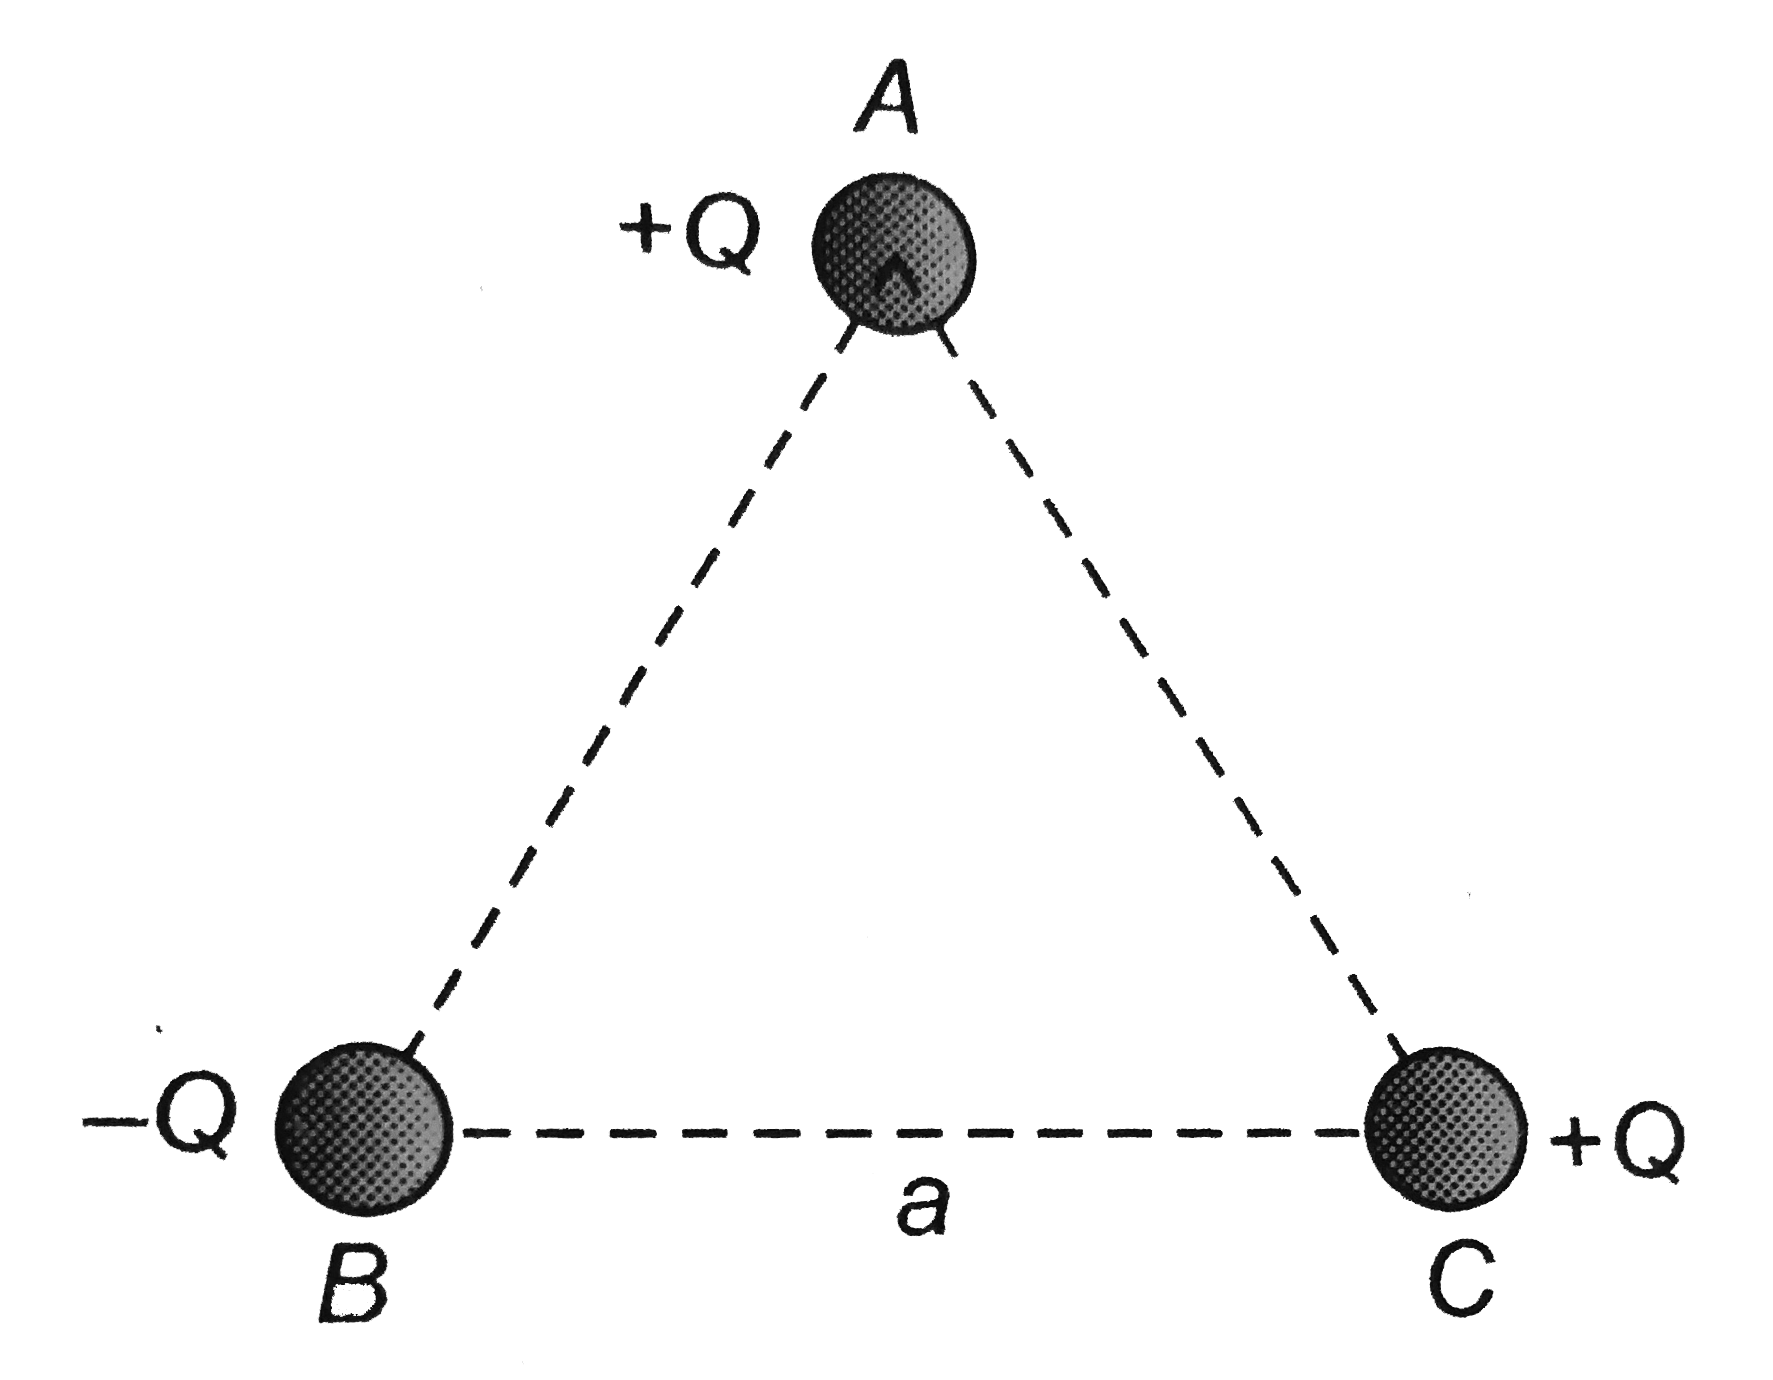 Three charges are placed at the vertices of an equilateral trianlge of side a as shown in the following figure. The force experienced by the charge placed at the vertex A in a direction normal to BC is